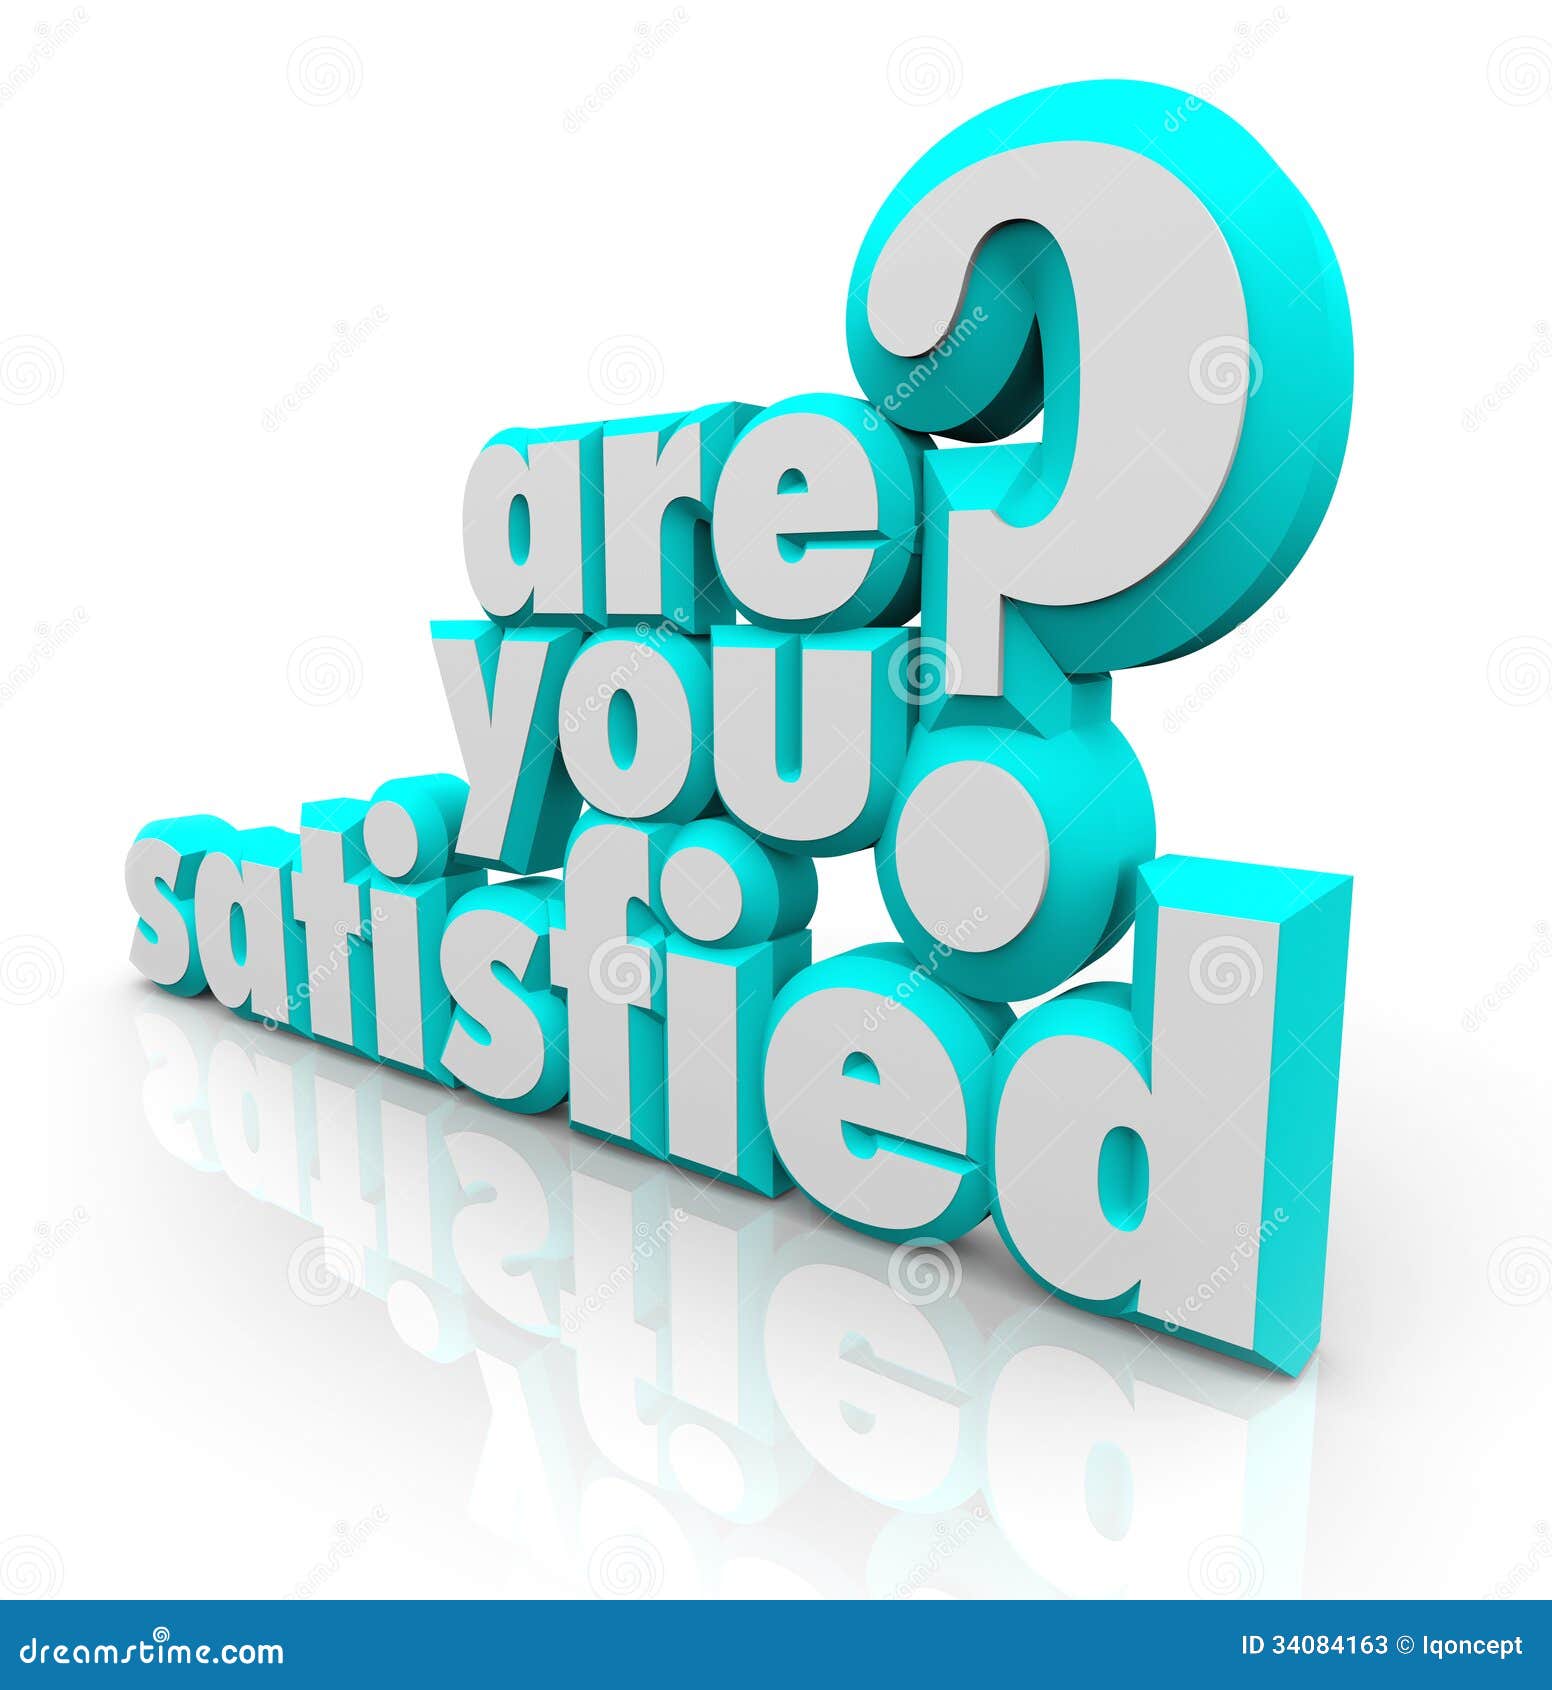 are you satisfied 3d words question pleased content fulfillment